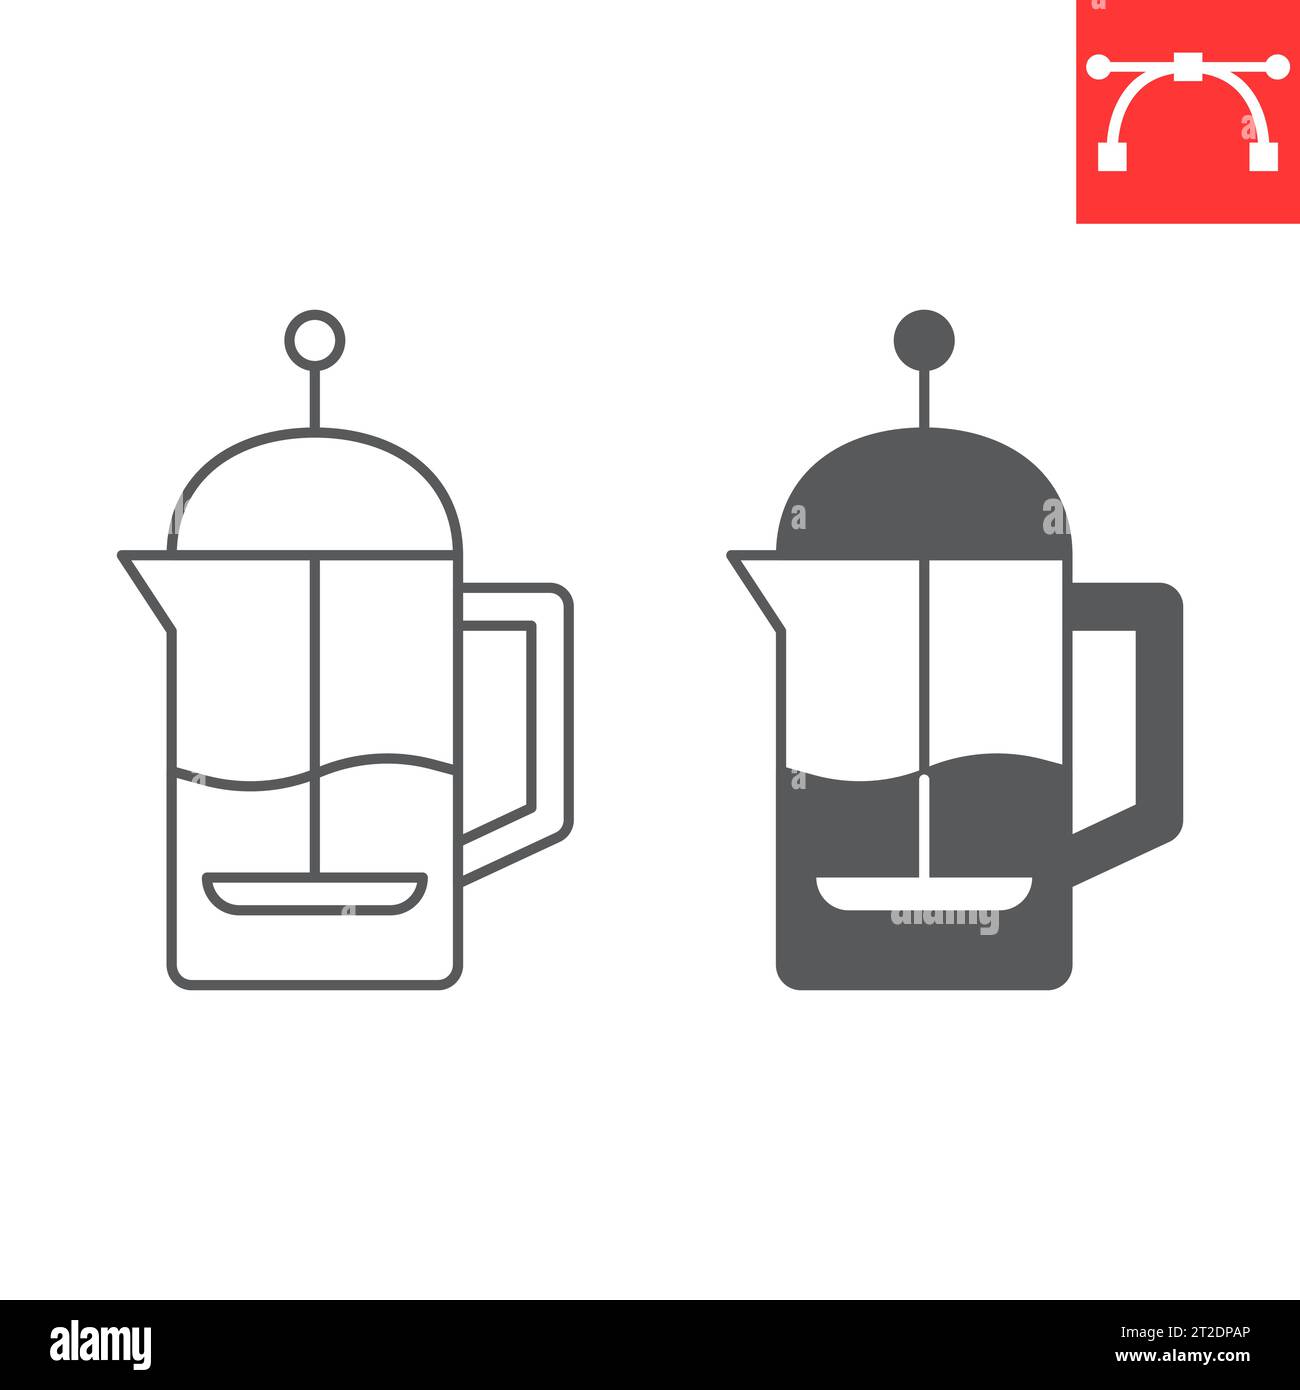 Coffee cup icon set. Vector set of line and colorful flat coffee stuff -  French press, takeaway cup, machine Stock Vector